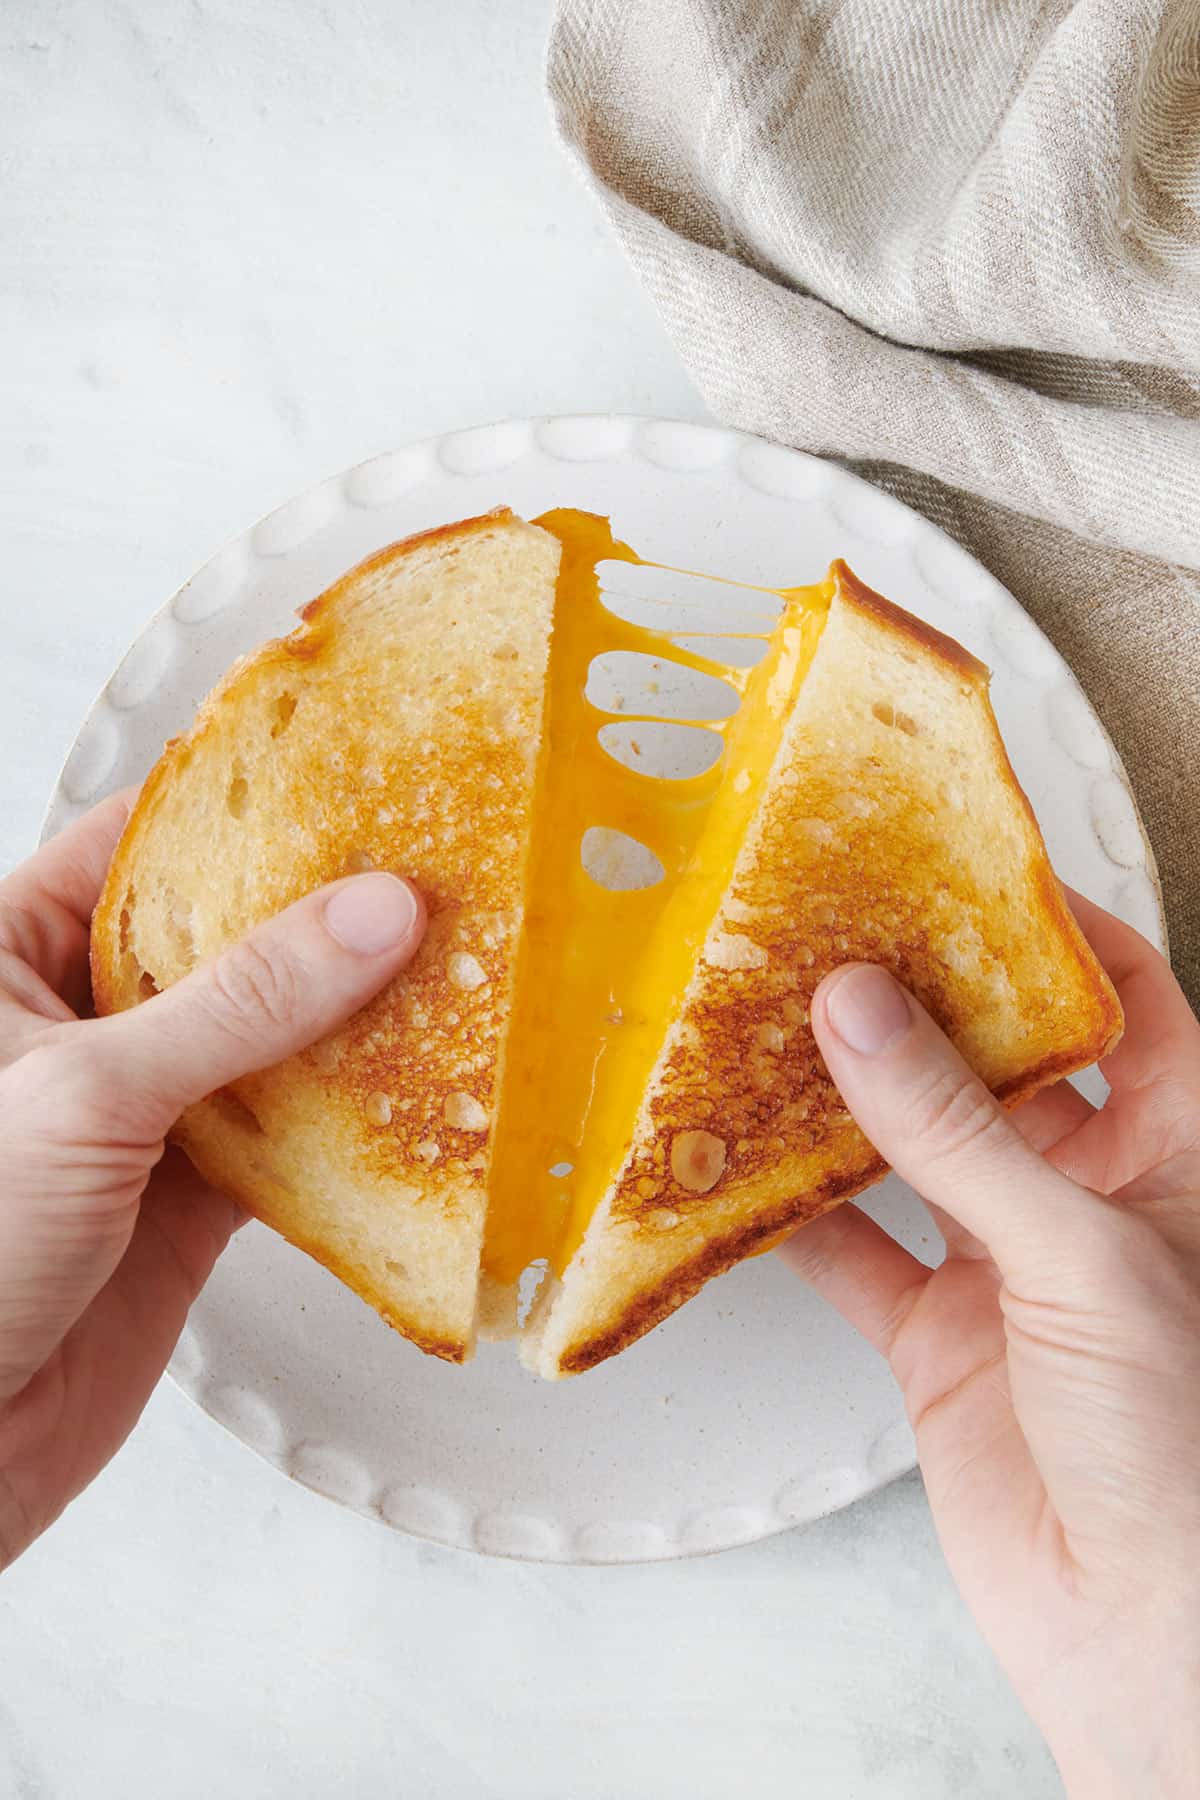 Grilled cheese cut in half and being pulled apart to show melty cheese.